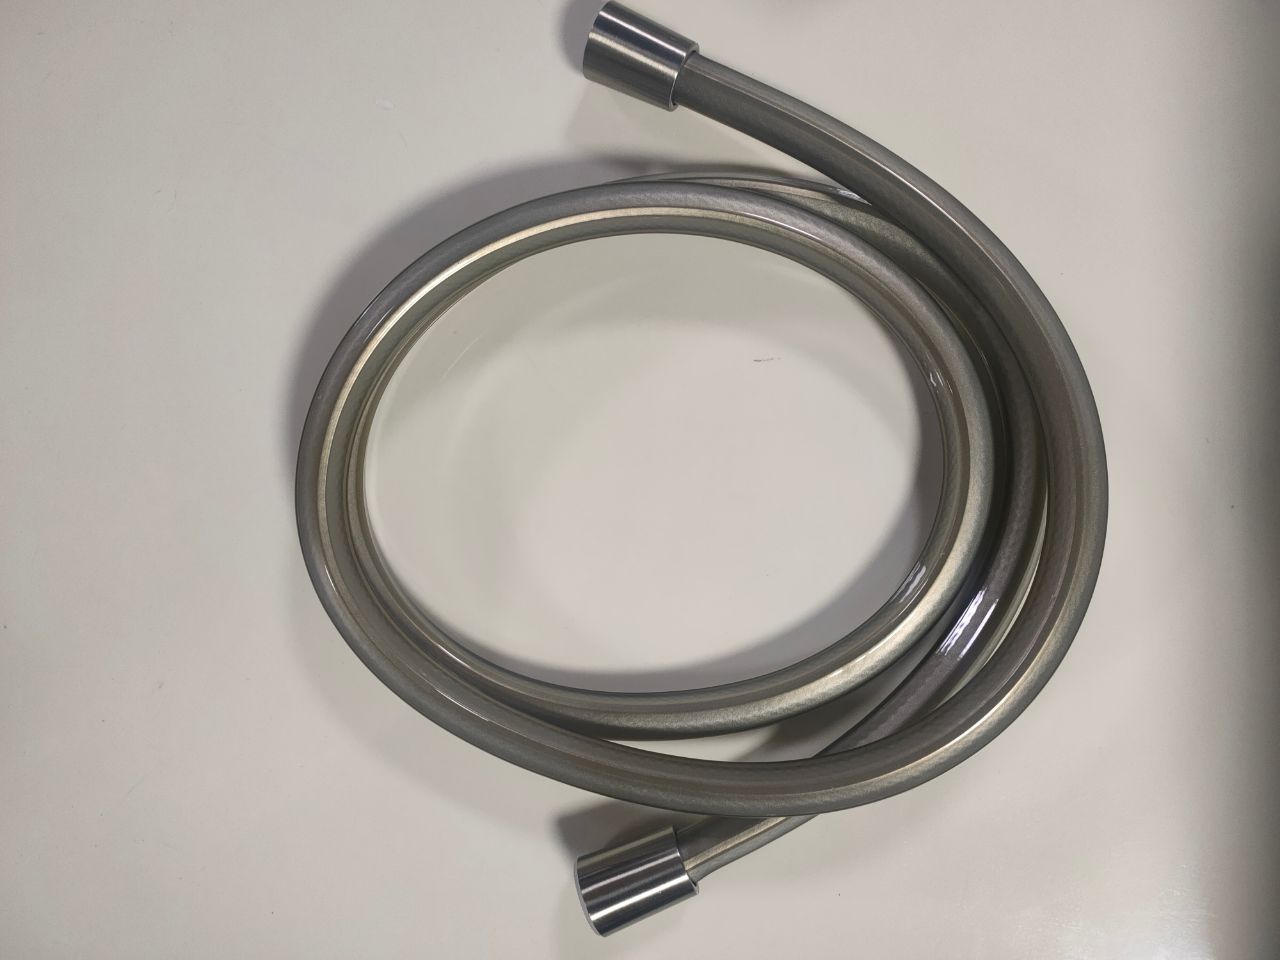 Square PVC Shower Hose 1500mm With KTW Certification